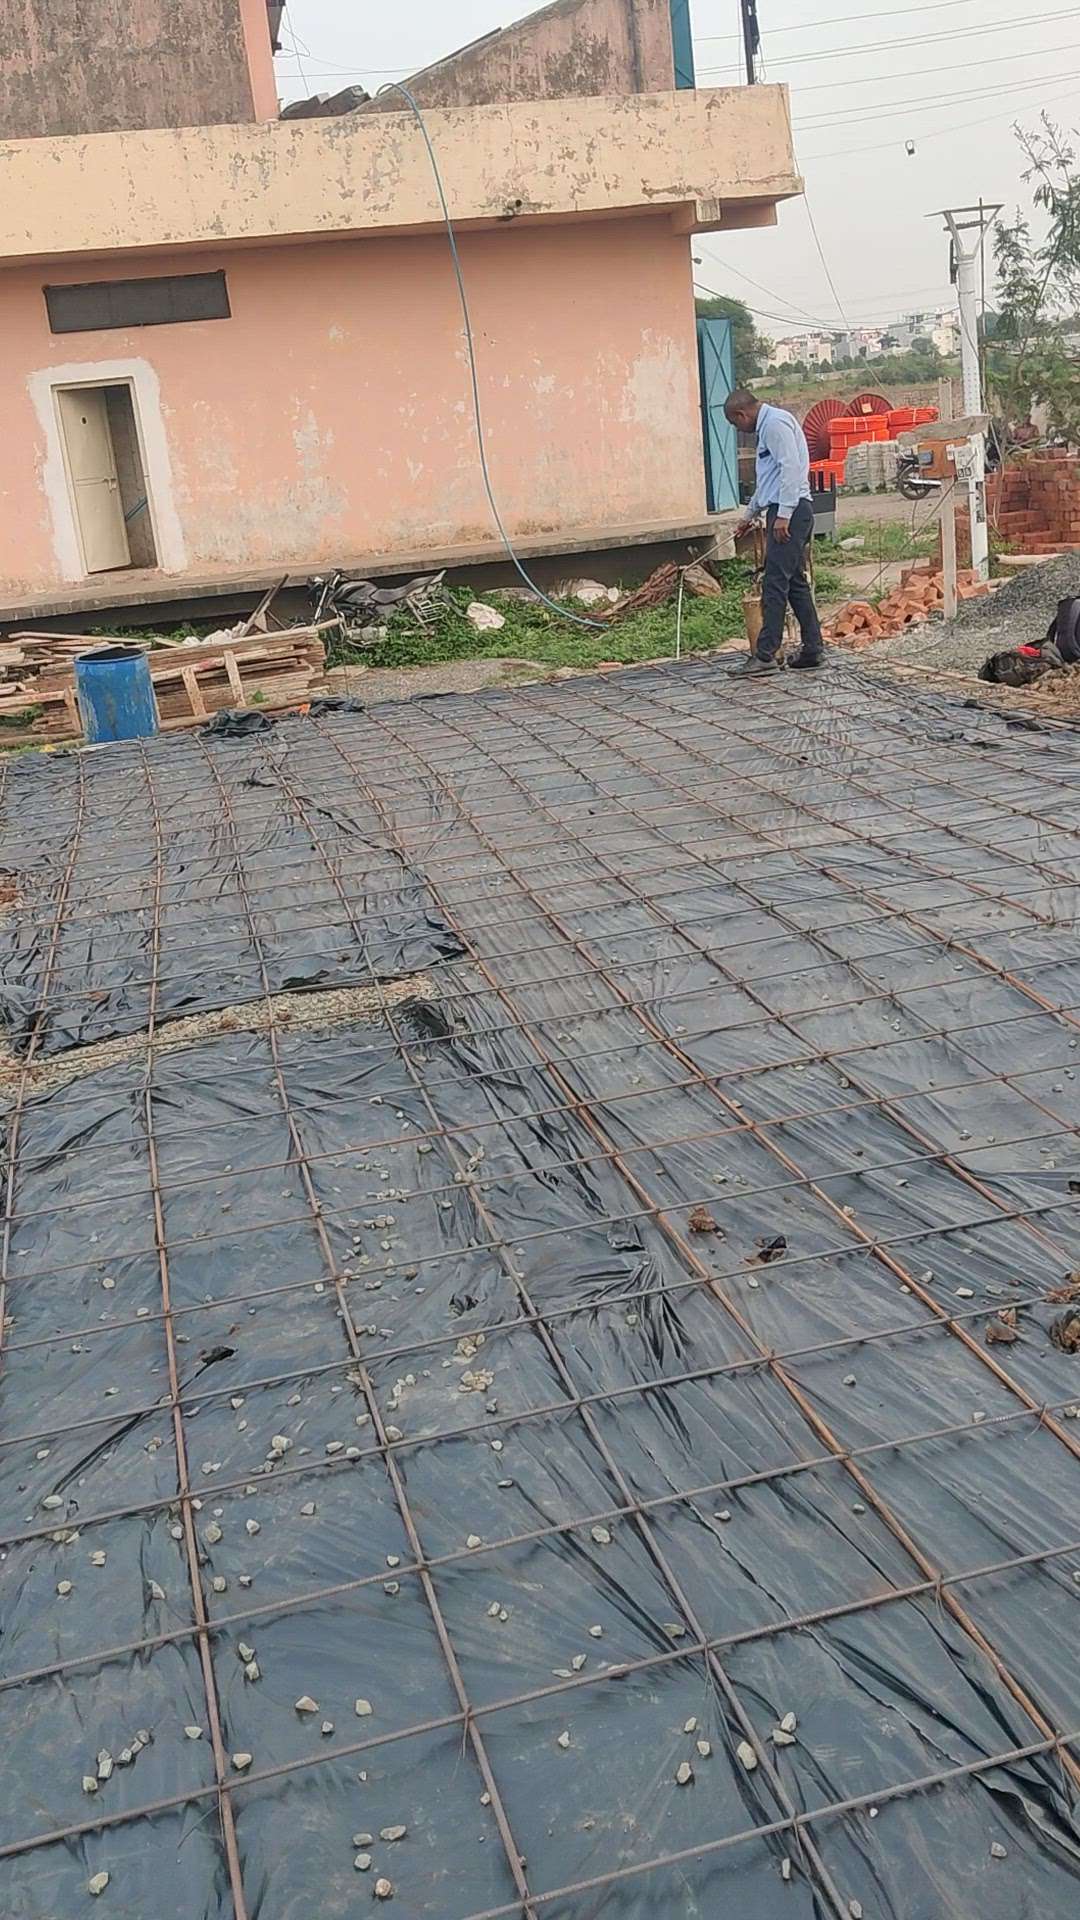 # pest control before plinth slab casting @ Tulsi state colony